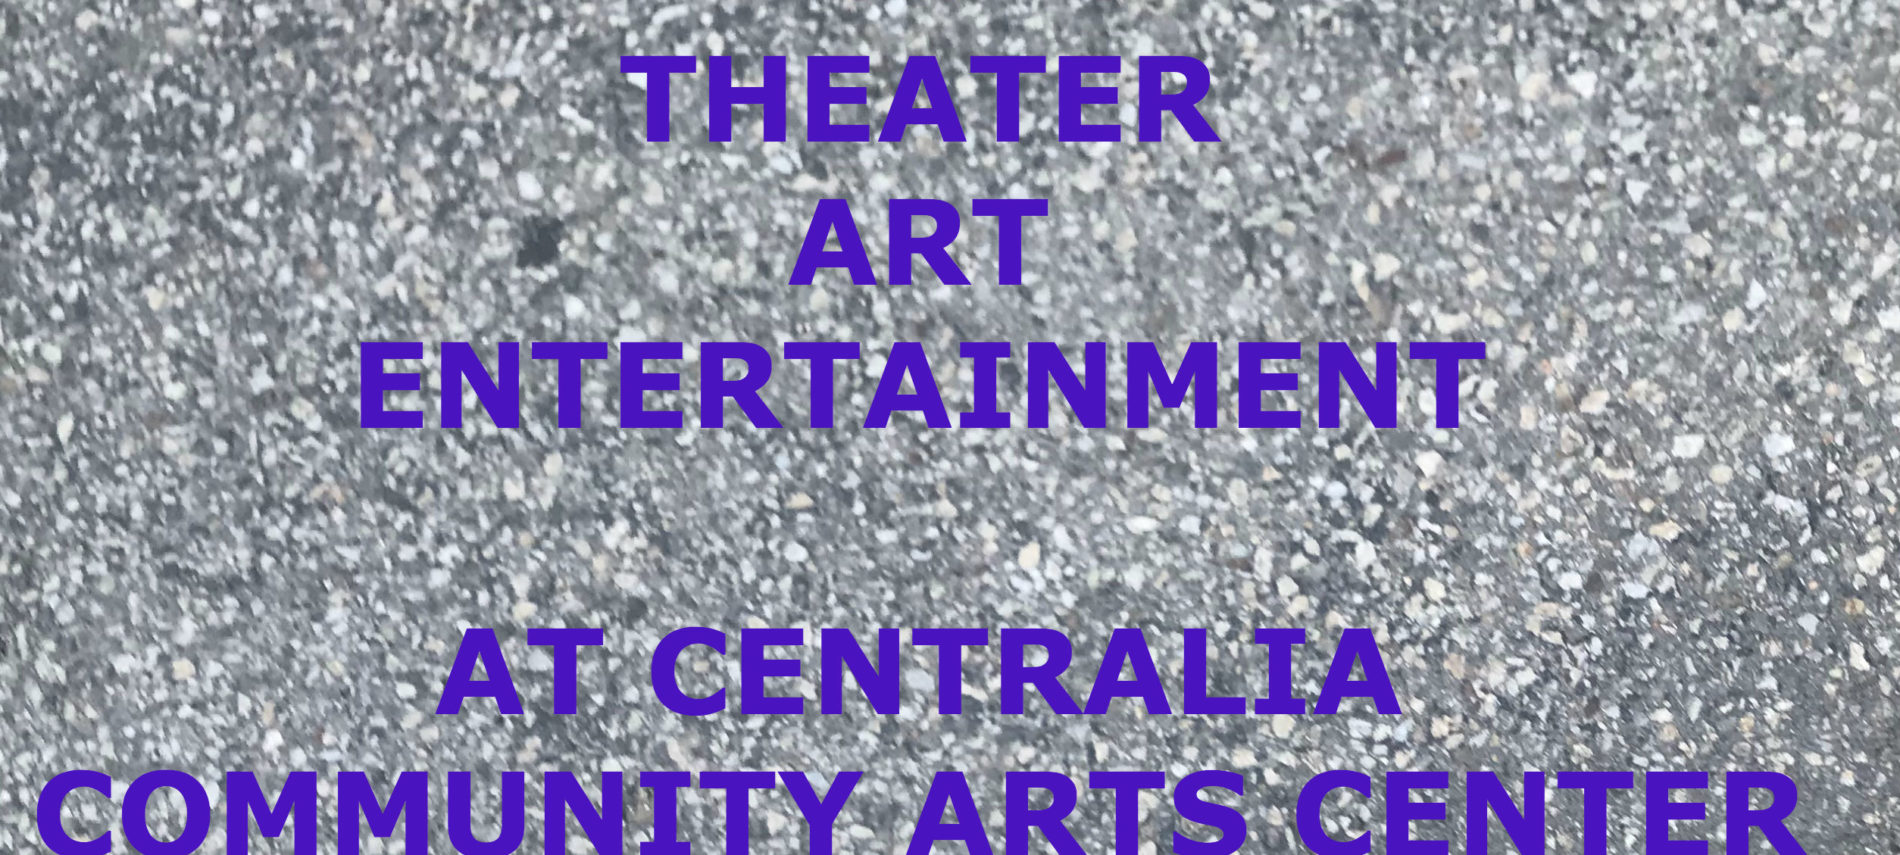 GRAY PEPPLY BACKGROUND WITH A TITLE: MUSIC, THEATER, ART AT CENTRALIA CONNUMITY ARTS CENTER